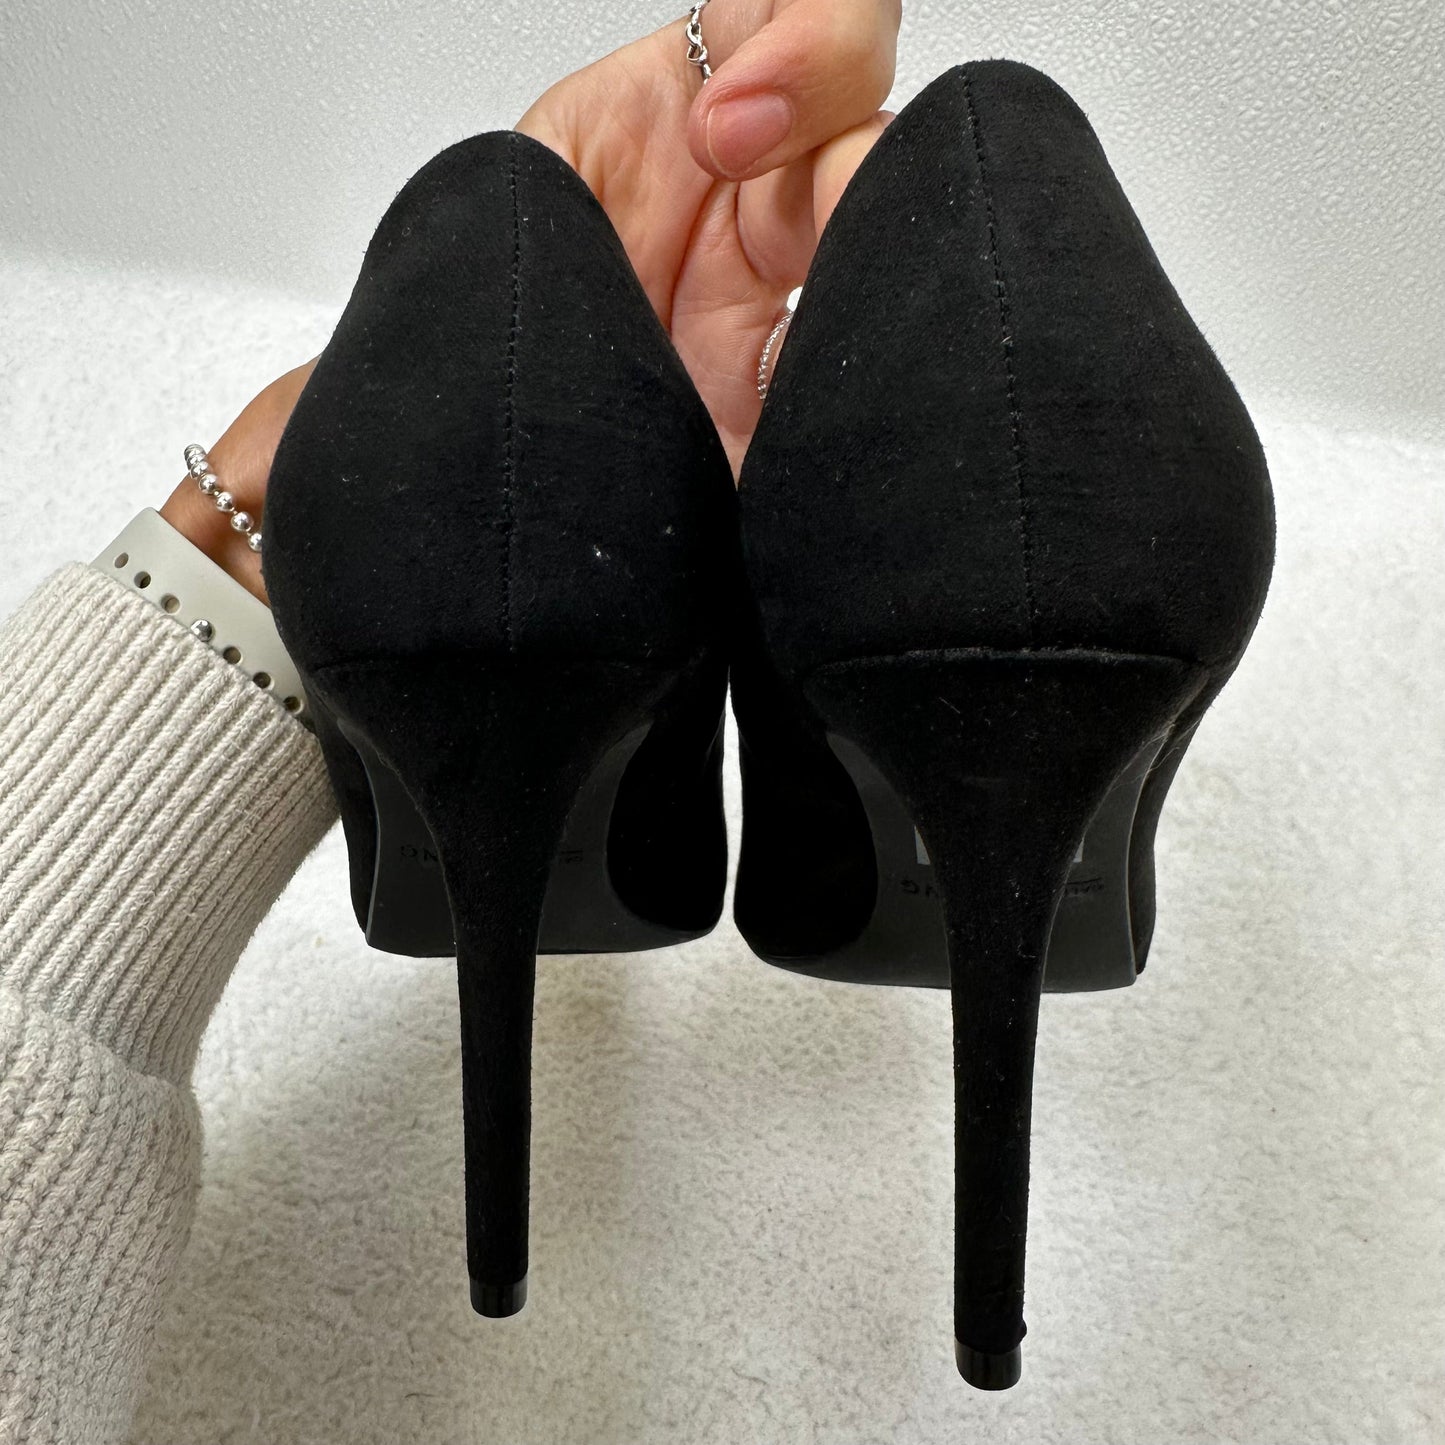 Black Shoes Heels Stiletto Call It Spring, Size 6.5